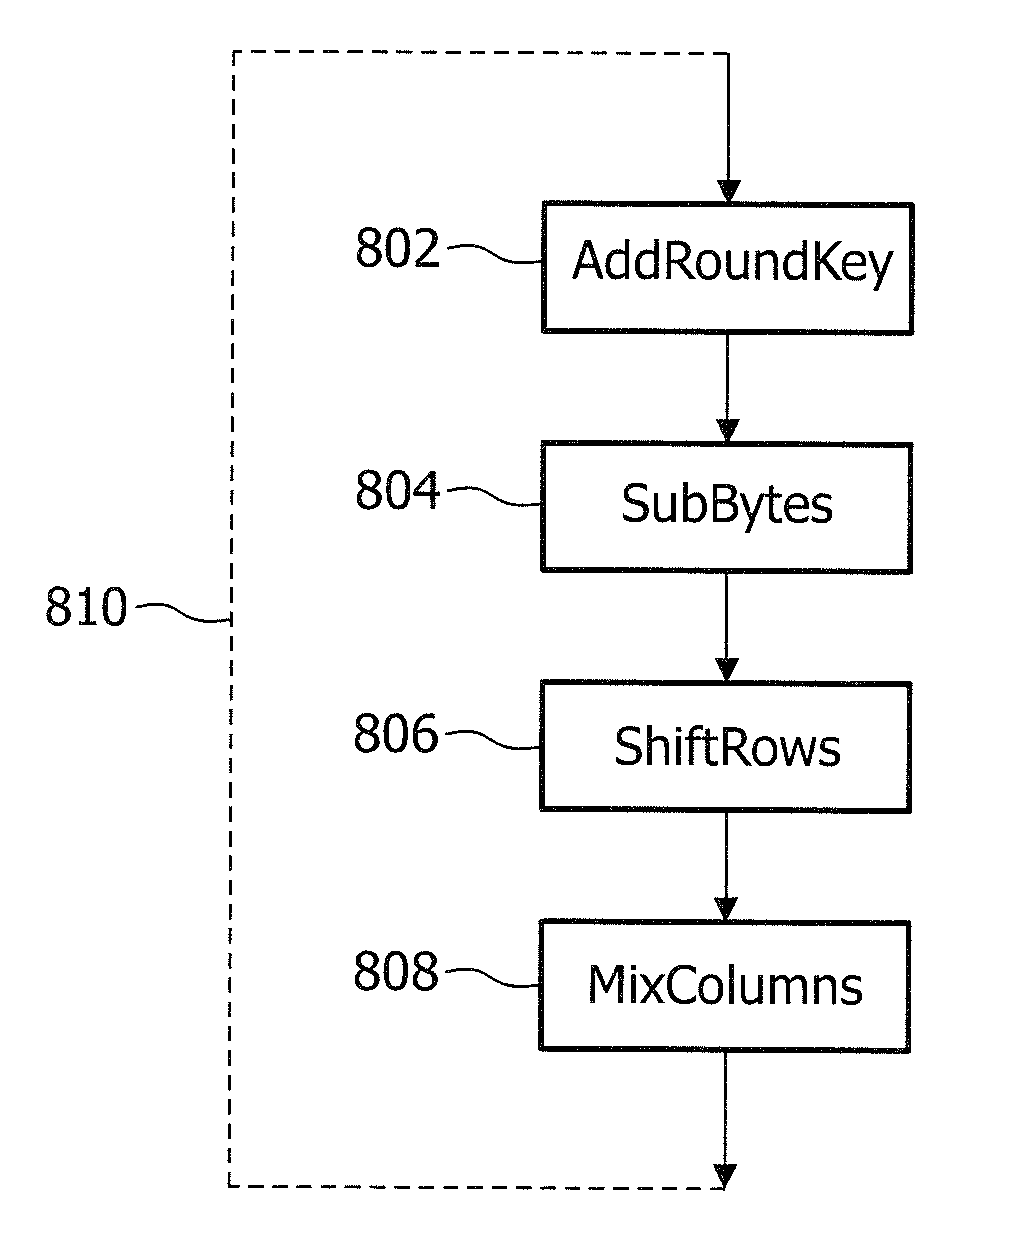 White-box cryptographic system with input dependent encodings